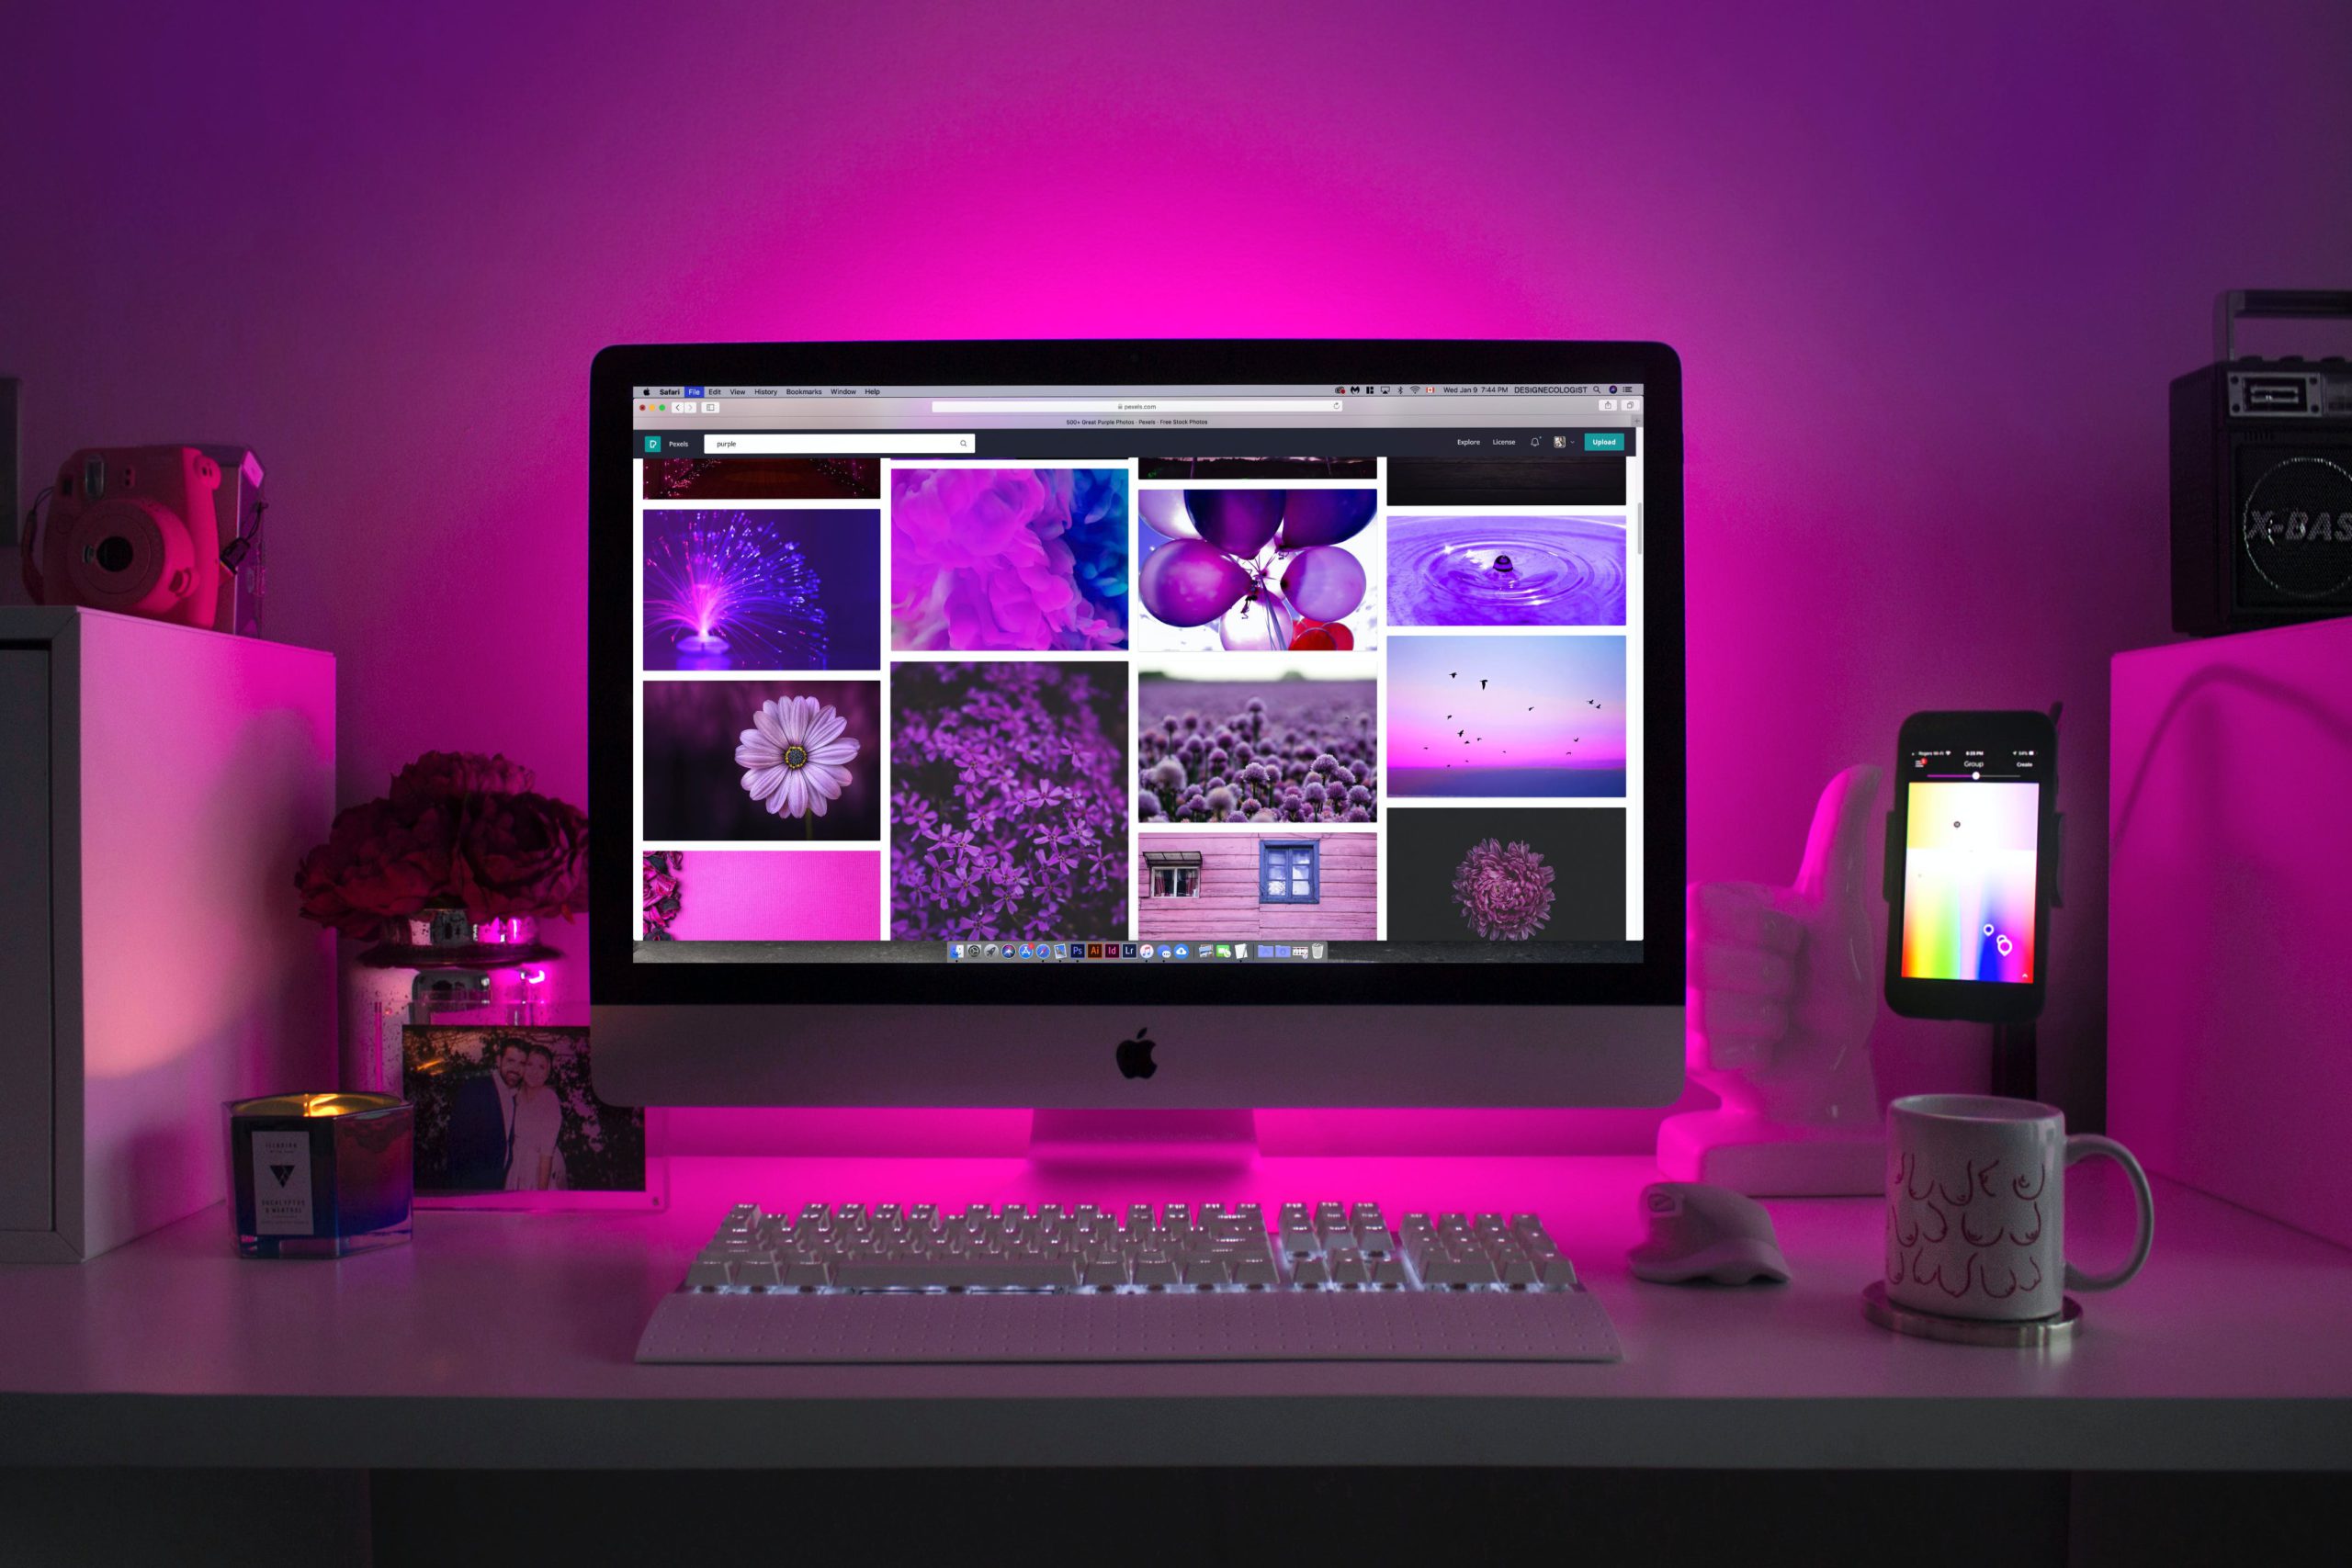 The benefits of Pexels for content creators - easy access images. Purpple lit room. Displaying a desk with a Apple Mac on, as well as other items. Pexels is displayed on the computer.